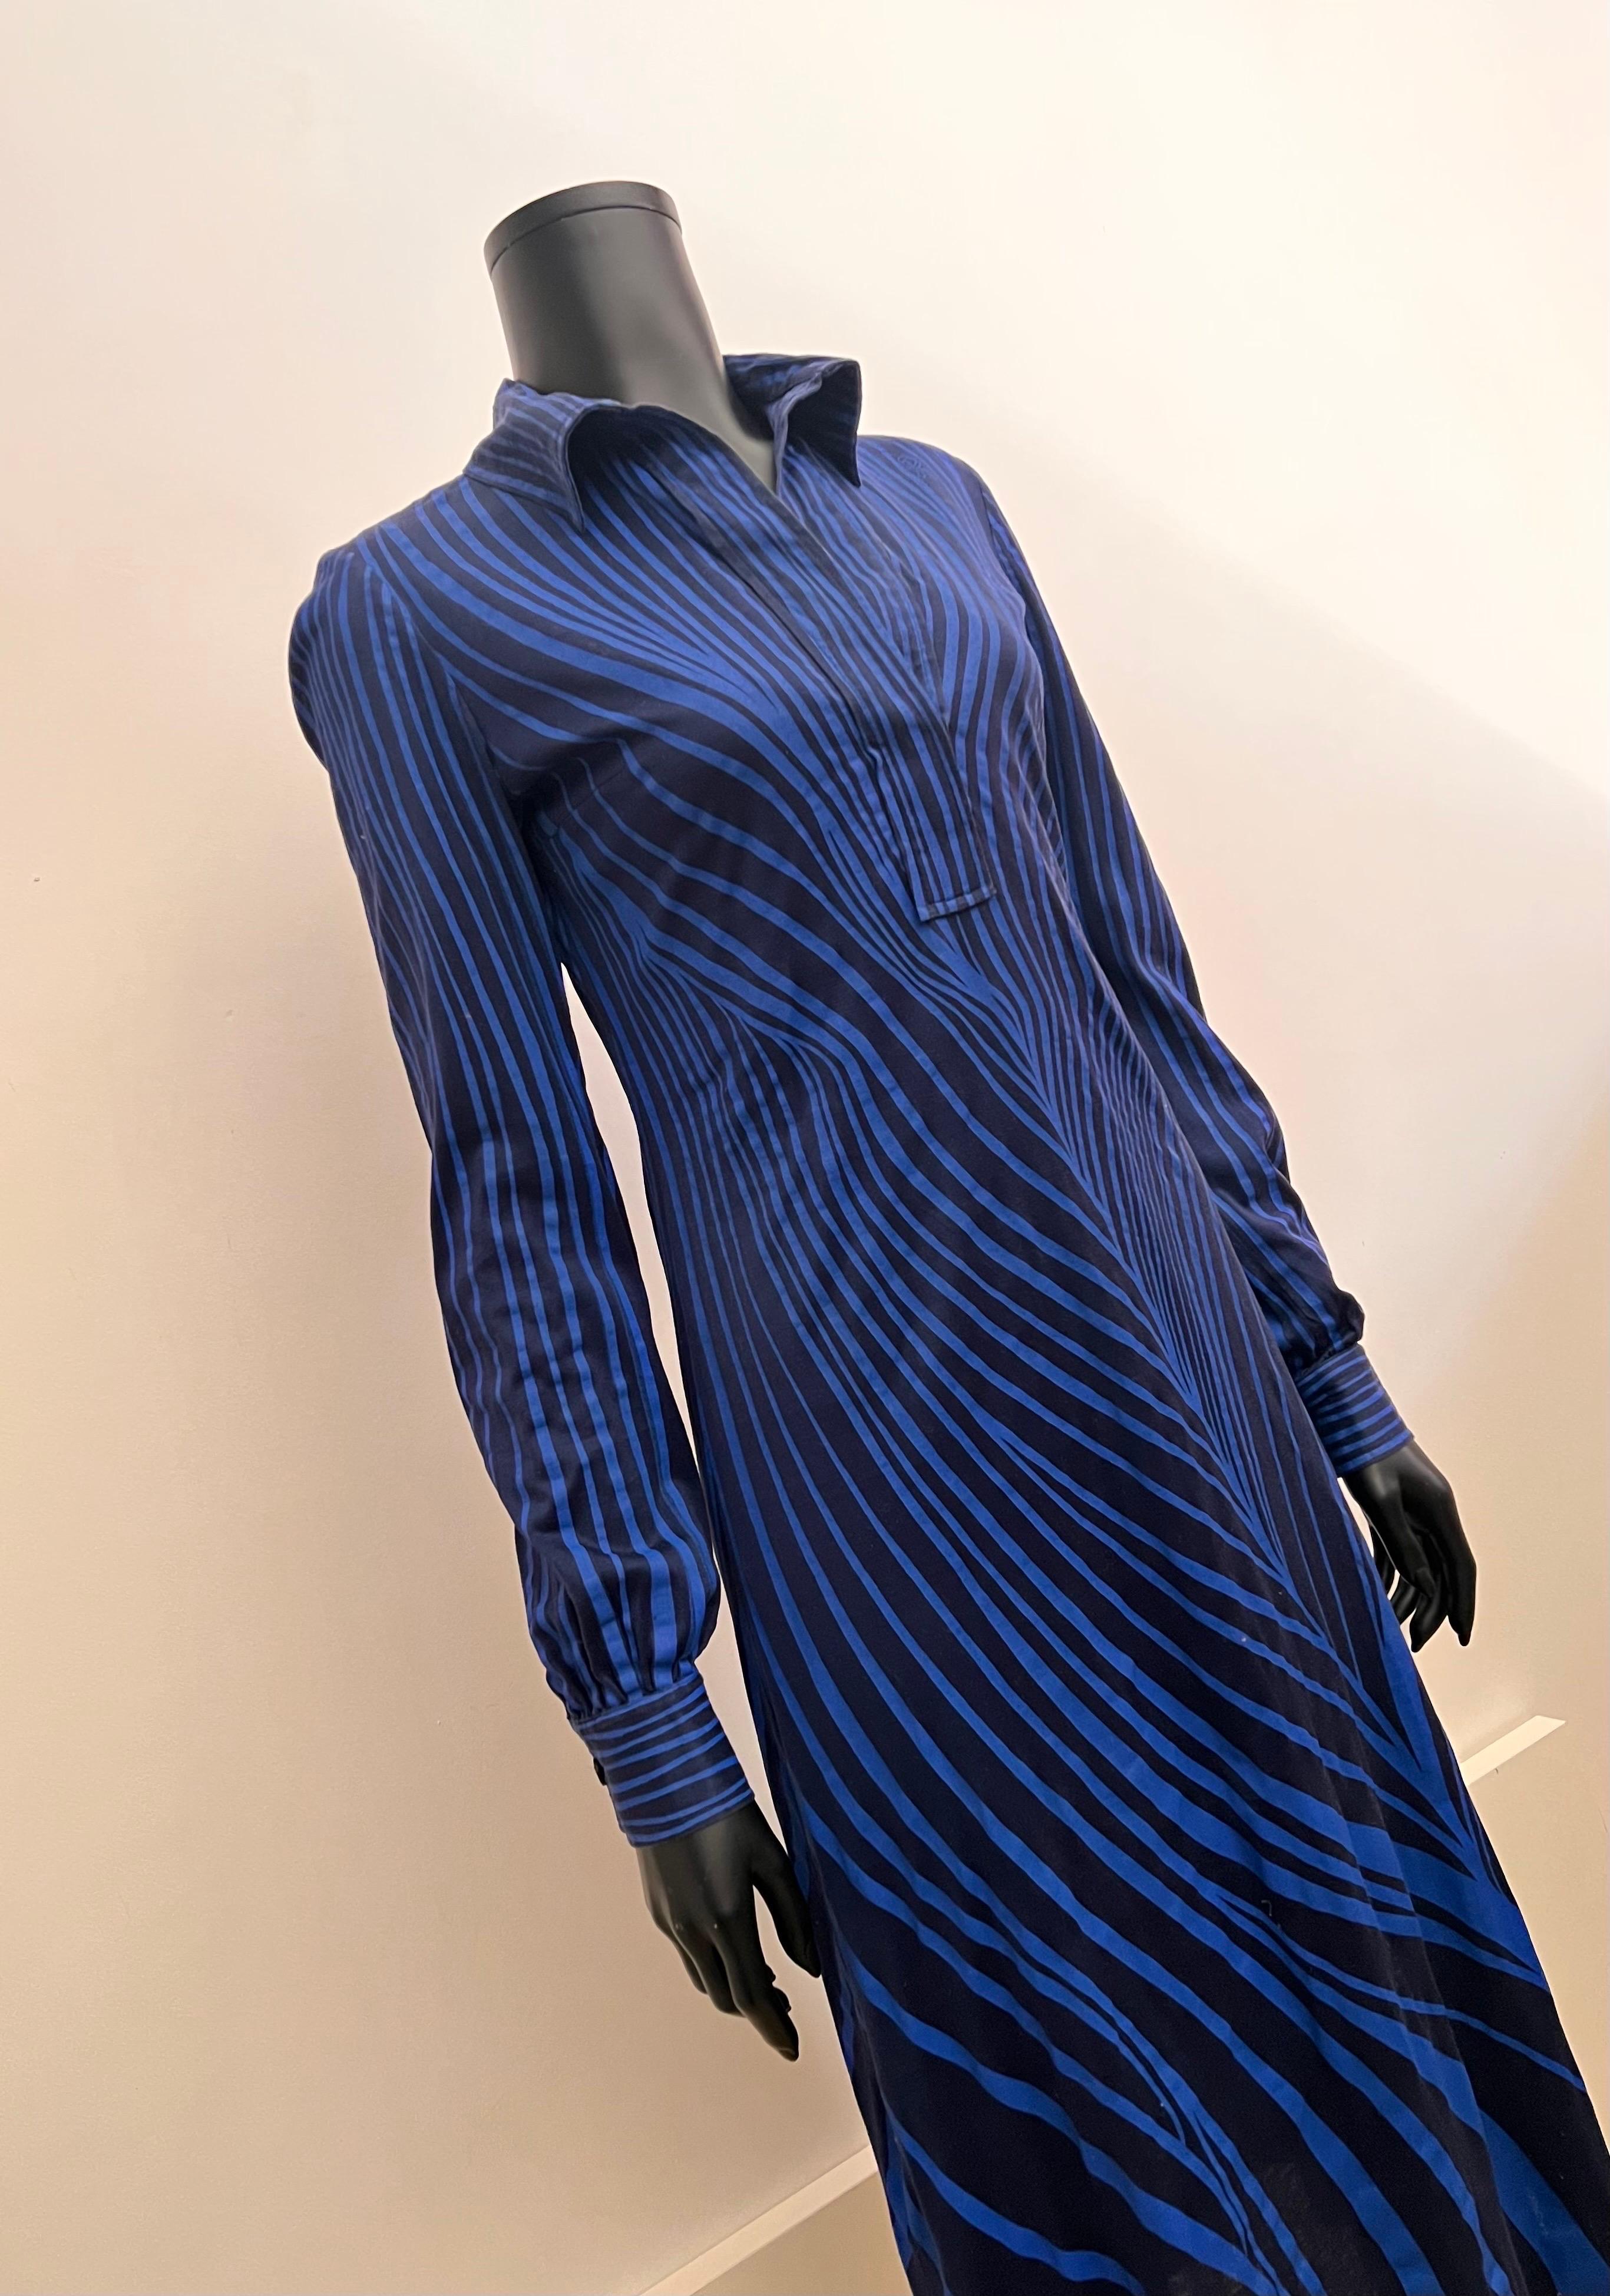 This rare and collectible vintage 1970’s Roberta DI Camerino calf length day dress in black with cobalt blue undulating all over print in cotton jersey fabric is a super stylish addition to your luxury vintage wardrobe.

Placket front with collar